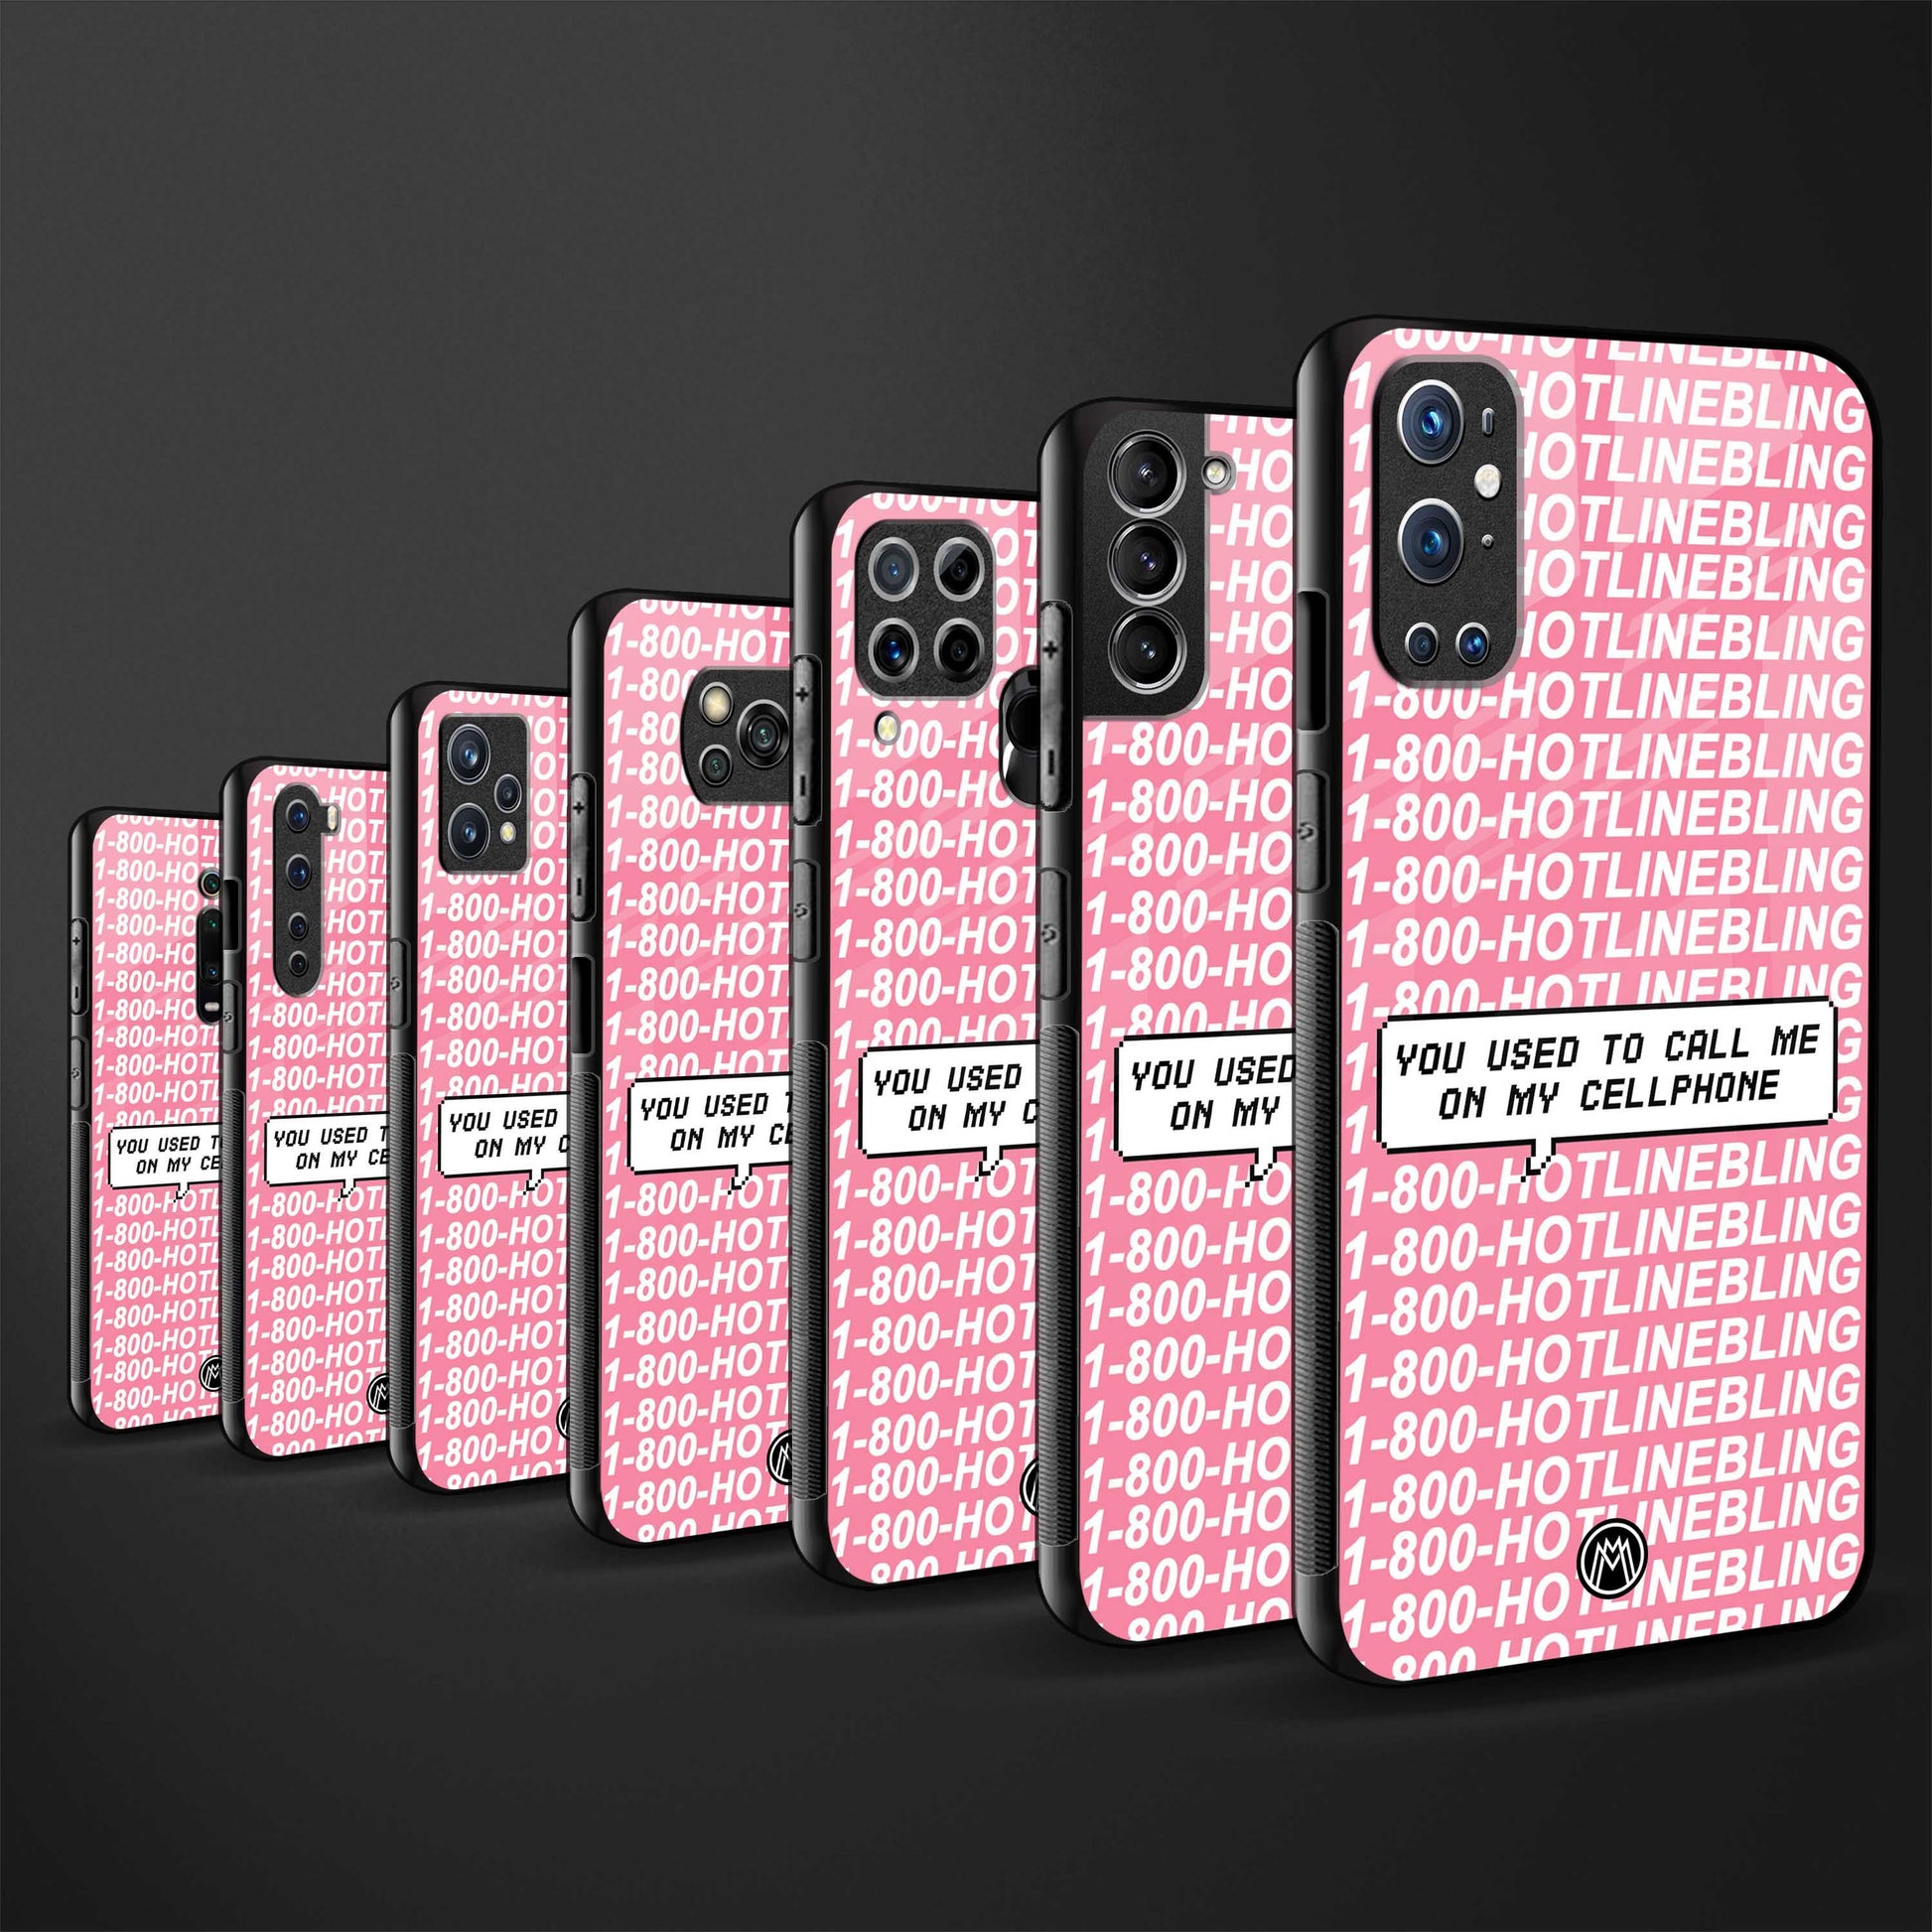 1800 hotline bling phone cover for oneplus 6t 